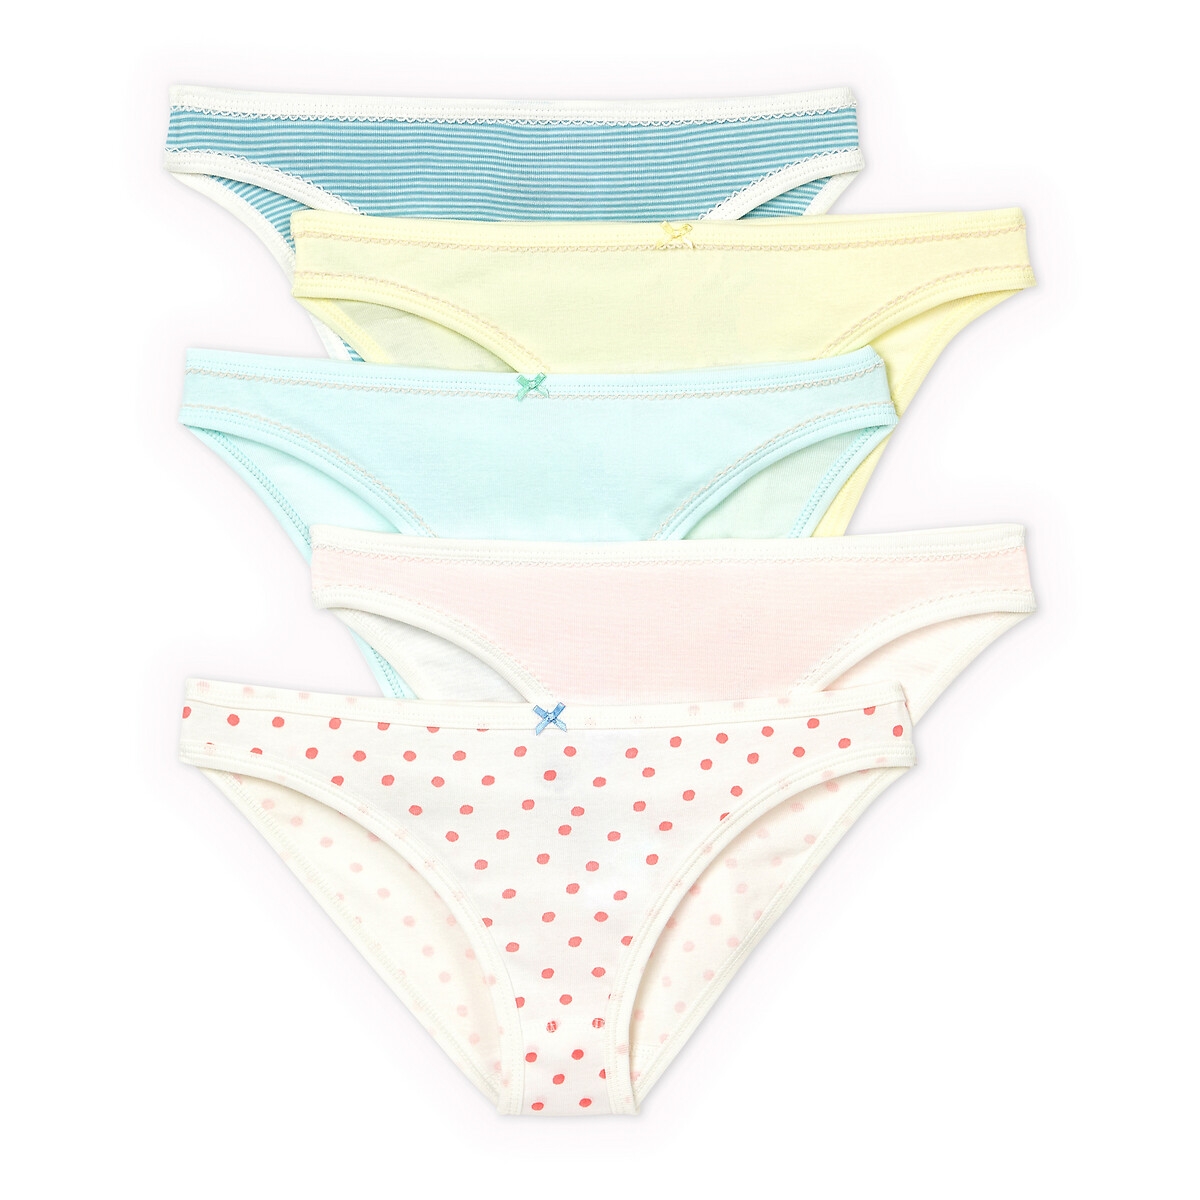 Pack of 5 Knickers in Cotton